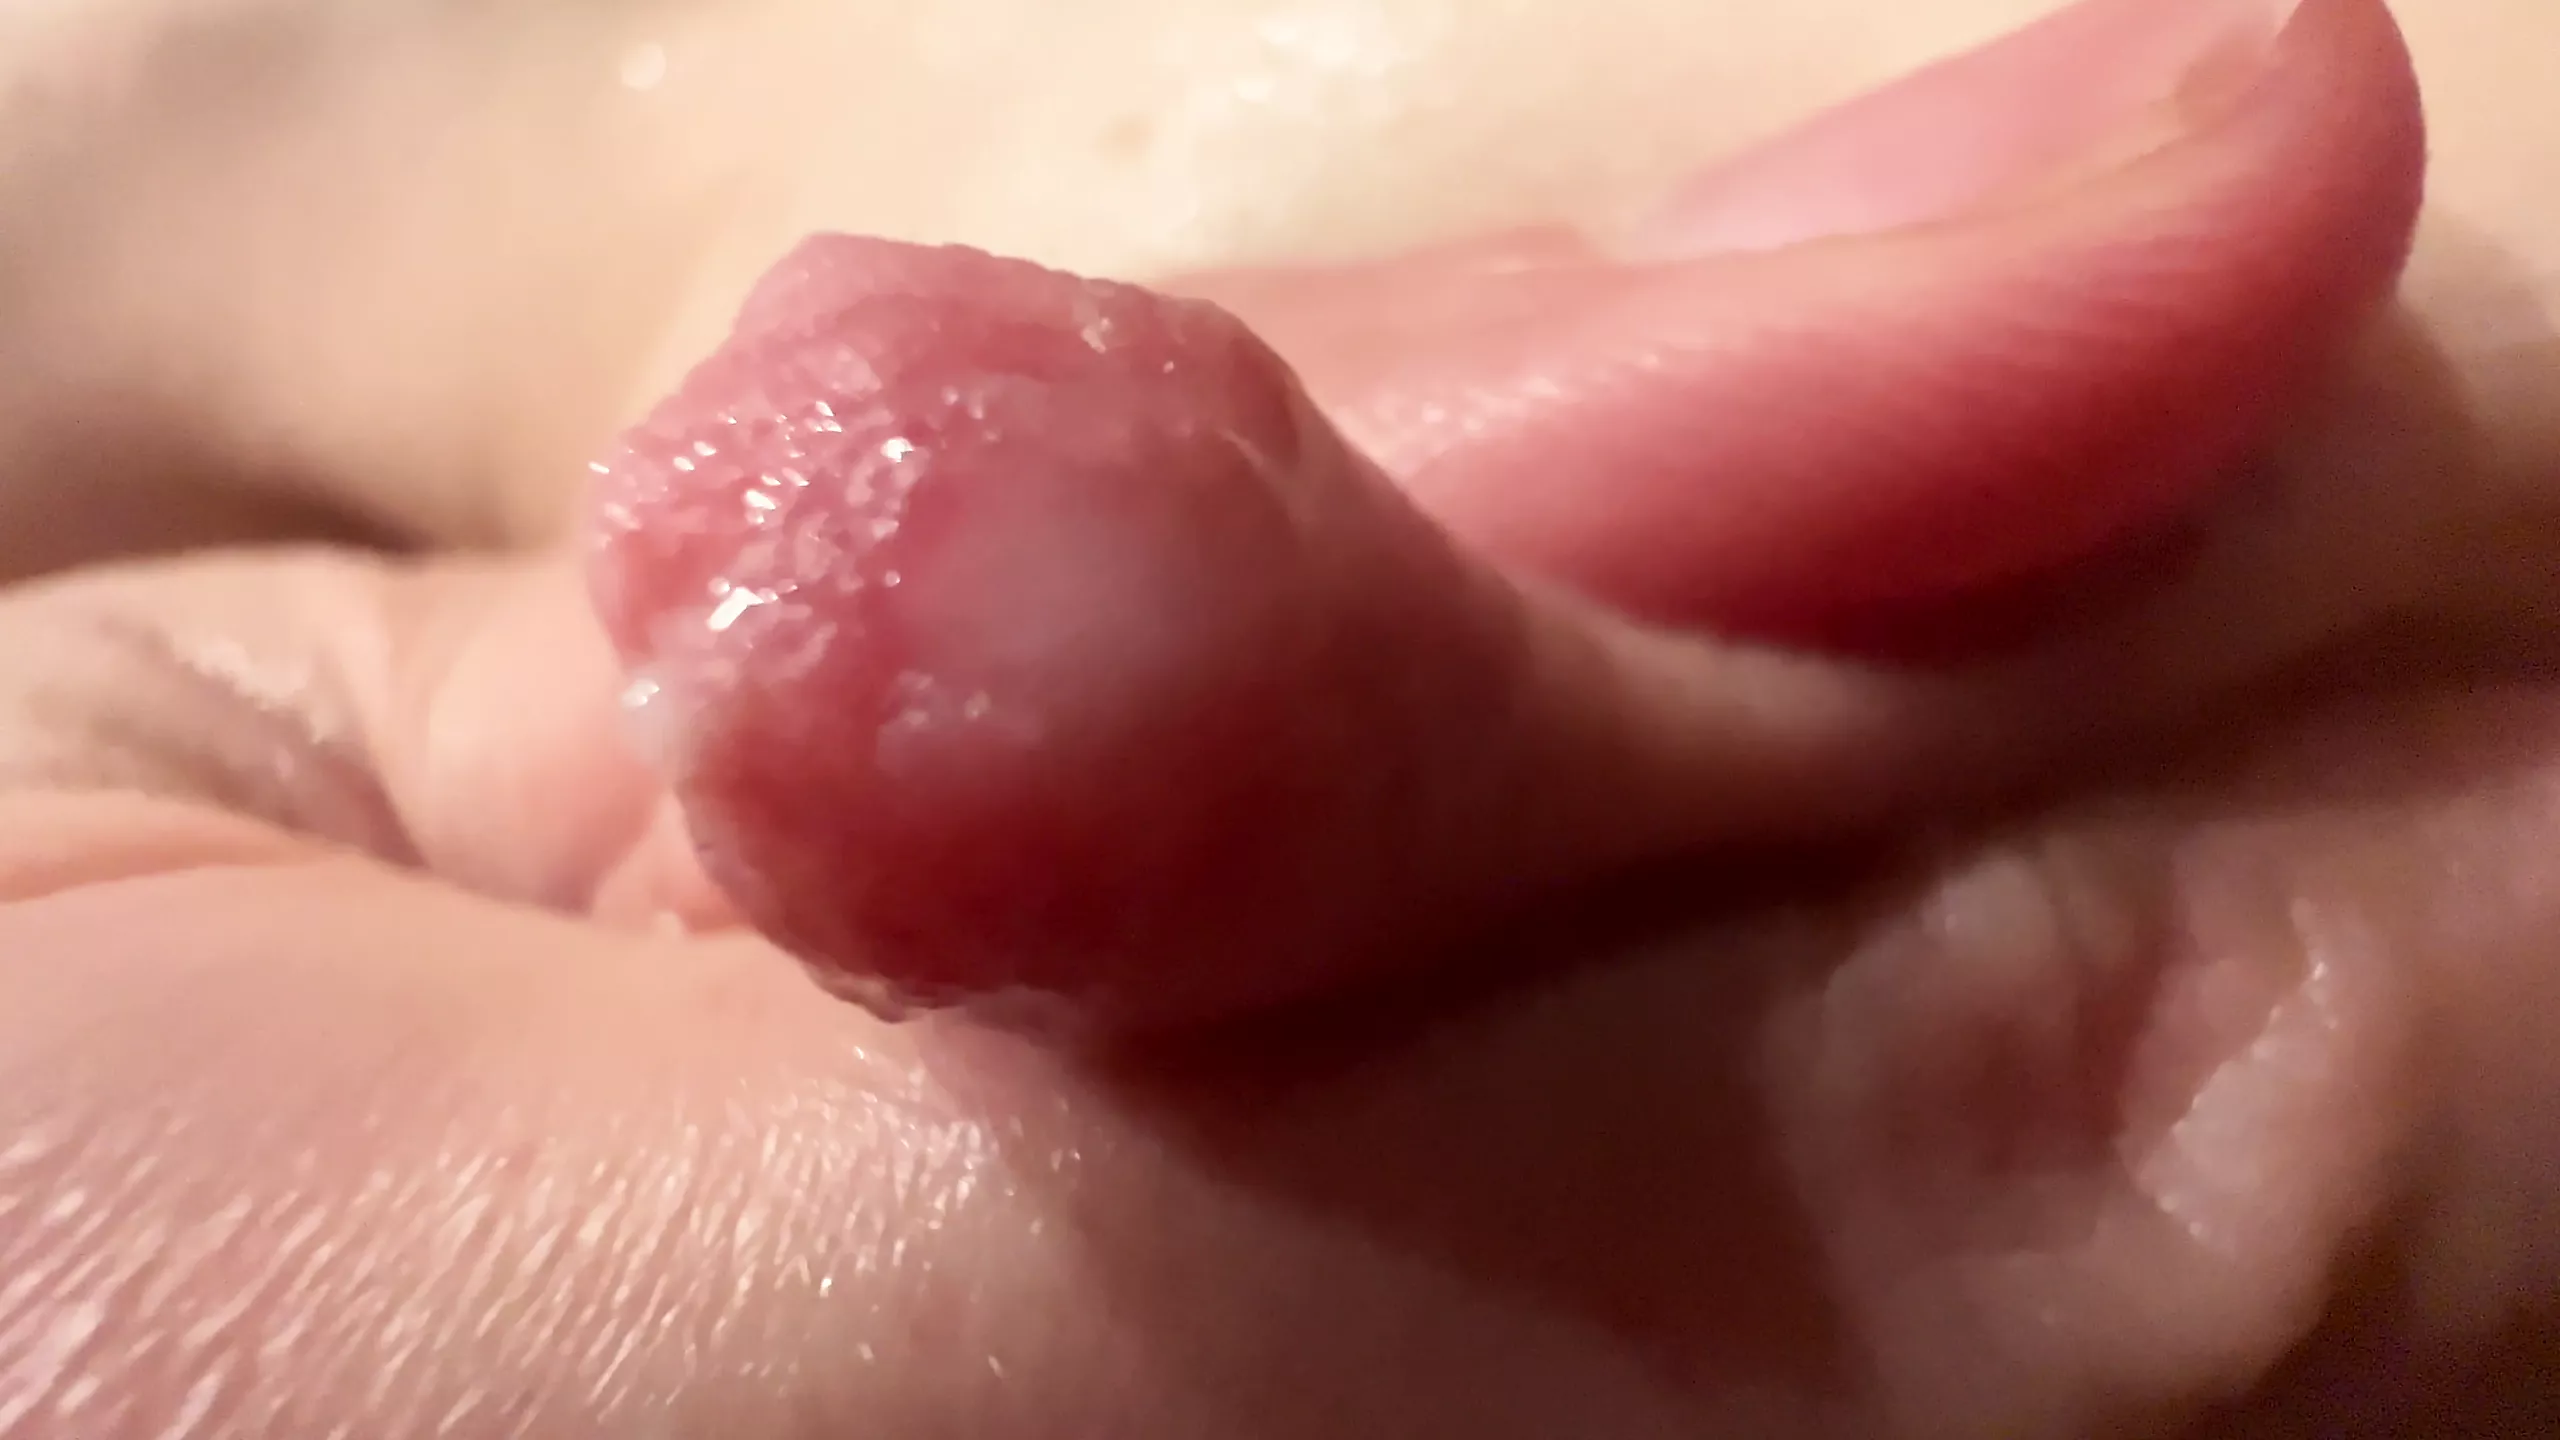 Huge Boobs Lactating Close Up - Female Breast Milk and Nipple Close-up, Porn ae | xHamster